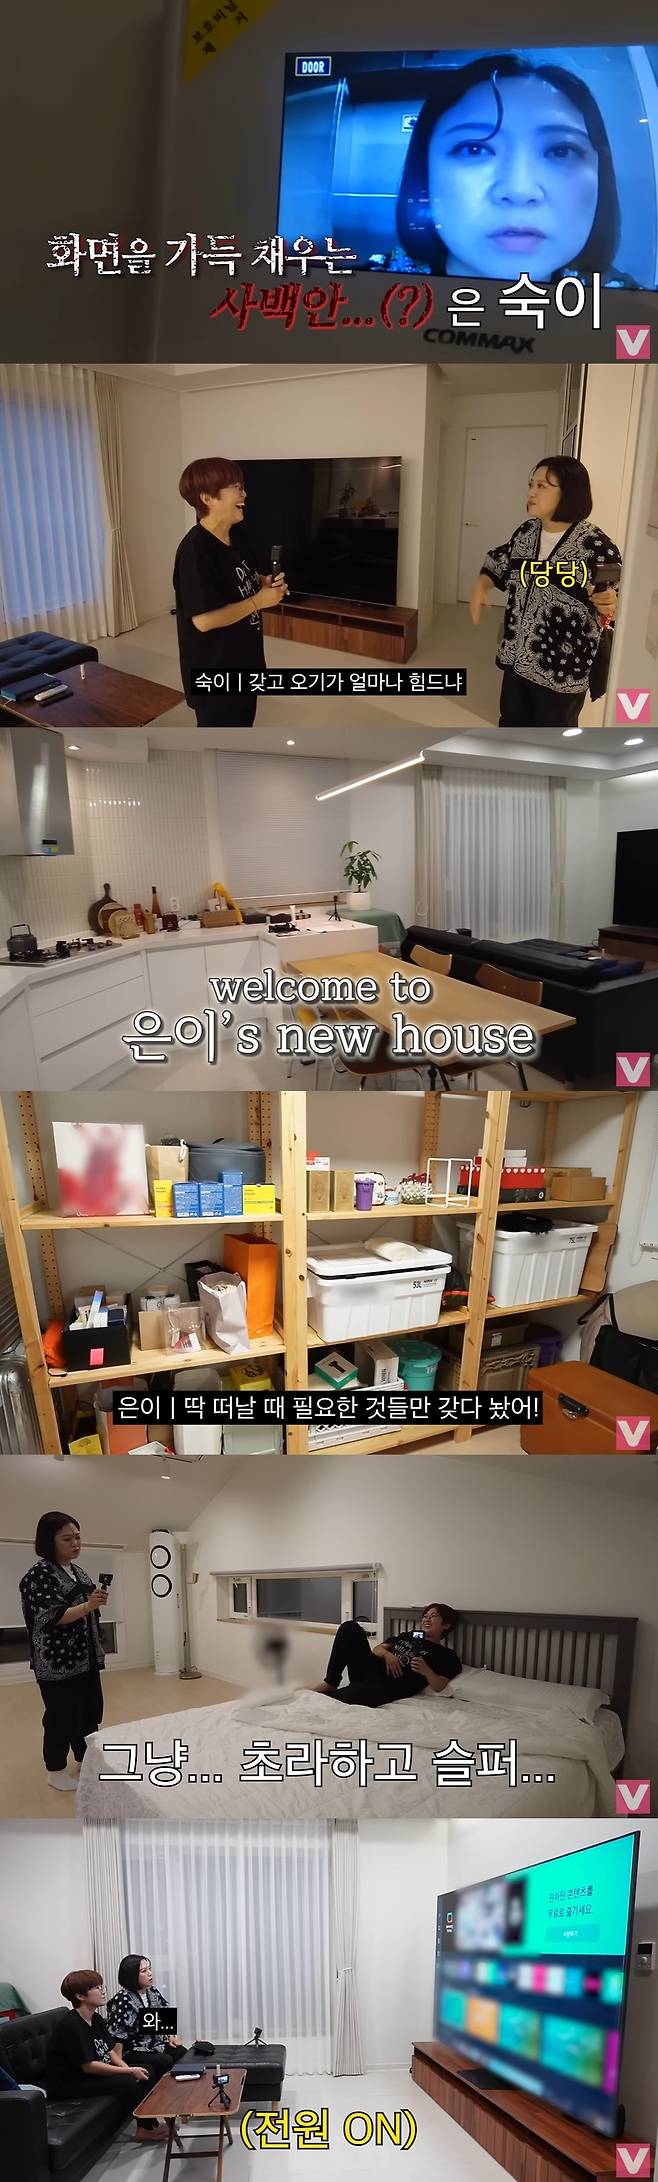 Comedian Song Eun-yi has revealed her new two-story home.On August 29, VIVO TV - Vivo SporTV channel posted a video titled Long live the independence of the first successful CEO! Song Eun-yis Housewarming 2023.ver.On this day, Song Eun-yi said, I have decided to visit a house that I moved to today. I have been to his house several times, but this is the first time I have moved home.At that time, the doorbell rang and Kim Sook, owner of four hundred eyes filled the interphone screen. Kim Sook prepared an air purifier as a housewarming gift and attracted attention.Song Eun-yi was surprised that it was the same product as the air purifier he purchased, but he could not keep an eye on the waybill.Kim Sook picked up the air purifier that Song Eun-yi ordered and shipped to the office. Kim Sook said, How hard is it to bring it?I am very strong these days, and Song Eun-yi grabbed his neck, saying, This is a cheater. Kim Sook looked around Song Eun-yis house and said, The house is so good. Song Eun-yi made money. Look at that big TV. Kim Sook said, Save me!Holmes 4th year MC, I looked carefully from the living room to the kitchen and the room filled with various camping equipment.Kim Sook said, The most important thing in a two-story house is the Chinese door. Whether there is a Chinese door or not, there is a huge difference in heating and cooling costs.However, Bedroom, which is only a bed, was saddened, saying, I live really frugally compared to my sister.The most eye-catching thing about Song Eun-yis house was the 98-inch TV that filled one wall of the living room. Song Eun-yi boasted, I thought it would be big at first, but its perfect for a 30-pyeong house. I dont even think about going to the movie theater.At a more reasonable price than I thought, Kim Sook asked, Buy me one.Song Eun-yi then promised, I will buy it at the end of the year. Kim Sook poured out harsh words on his unreasonable pledge and said, Just give me this because Im going to carry it.